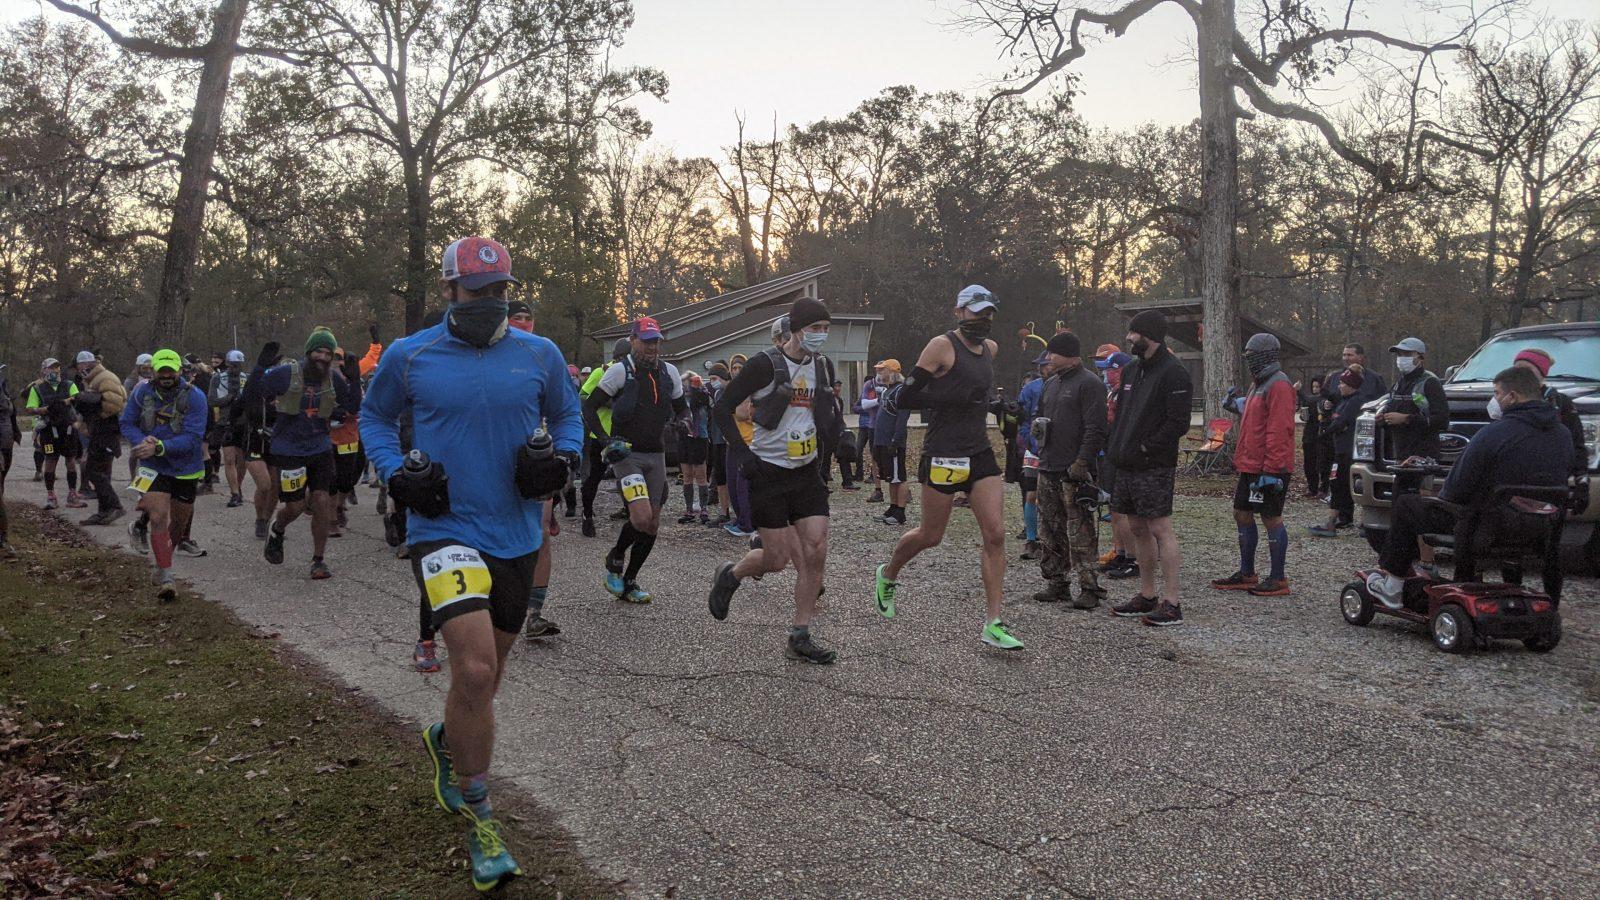 100 mile runners at the beginning of the loup garou trail run in louisiana